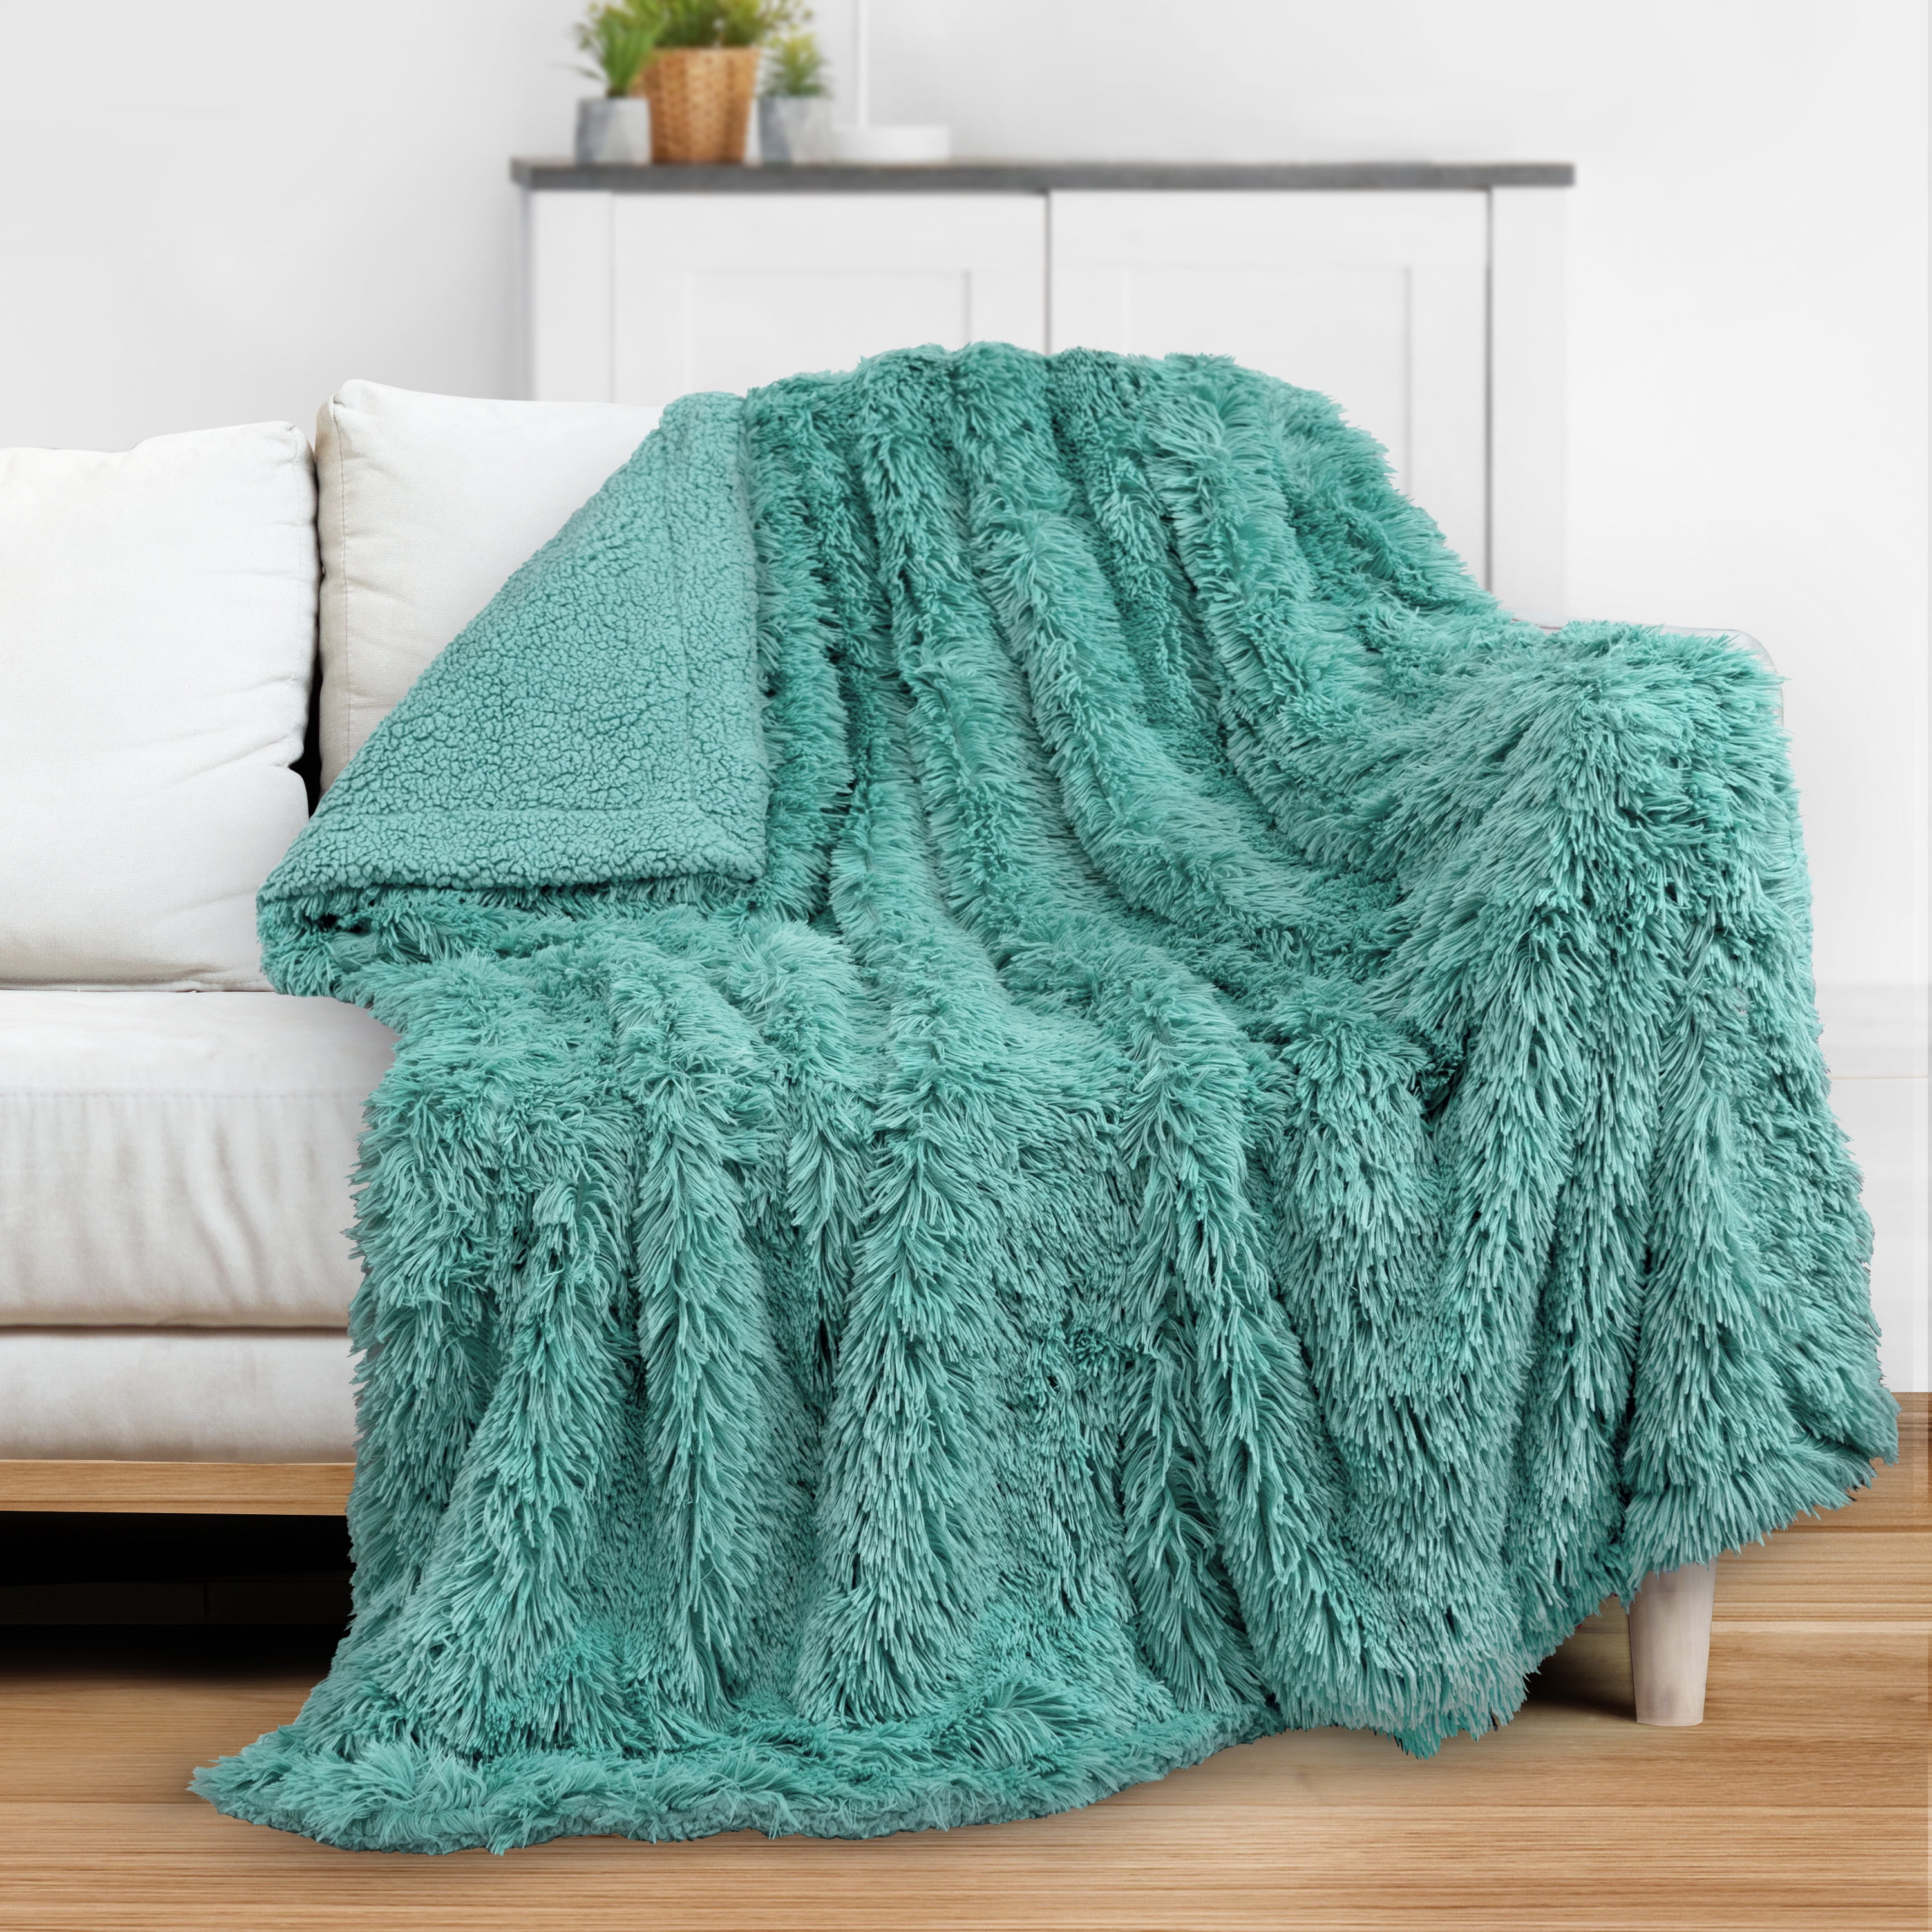 PAVILIA Soft Fluffy Faux Fur Throw Blanket, Teal Green, Shaggy Furry Warm  Sherpa Blanket Fleece Throw for Bed, Sofa, Couch, Decorative Fuzzy Plush  Comfy Thick Throw Blanket, 50x60 Inches 